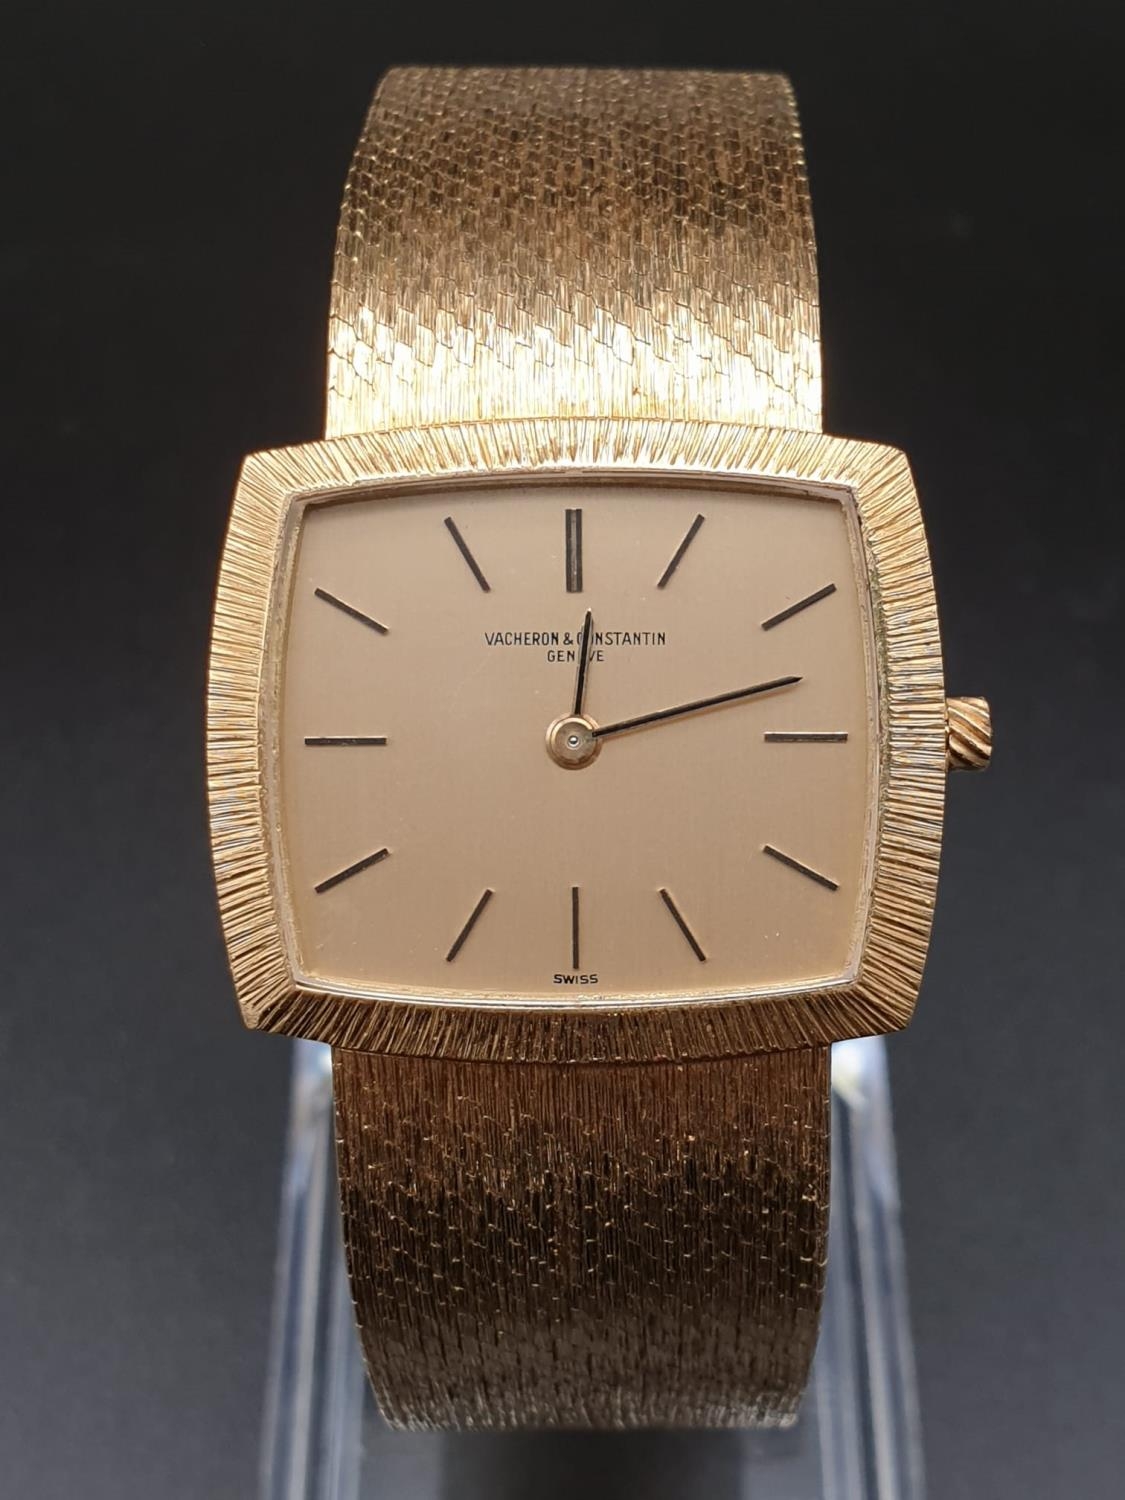 A VACHERON CONSTANTIN LADIES 18K WATCH WITH SQUARE FACE AND SOLID GOLD STRAP. 30MM